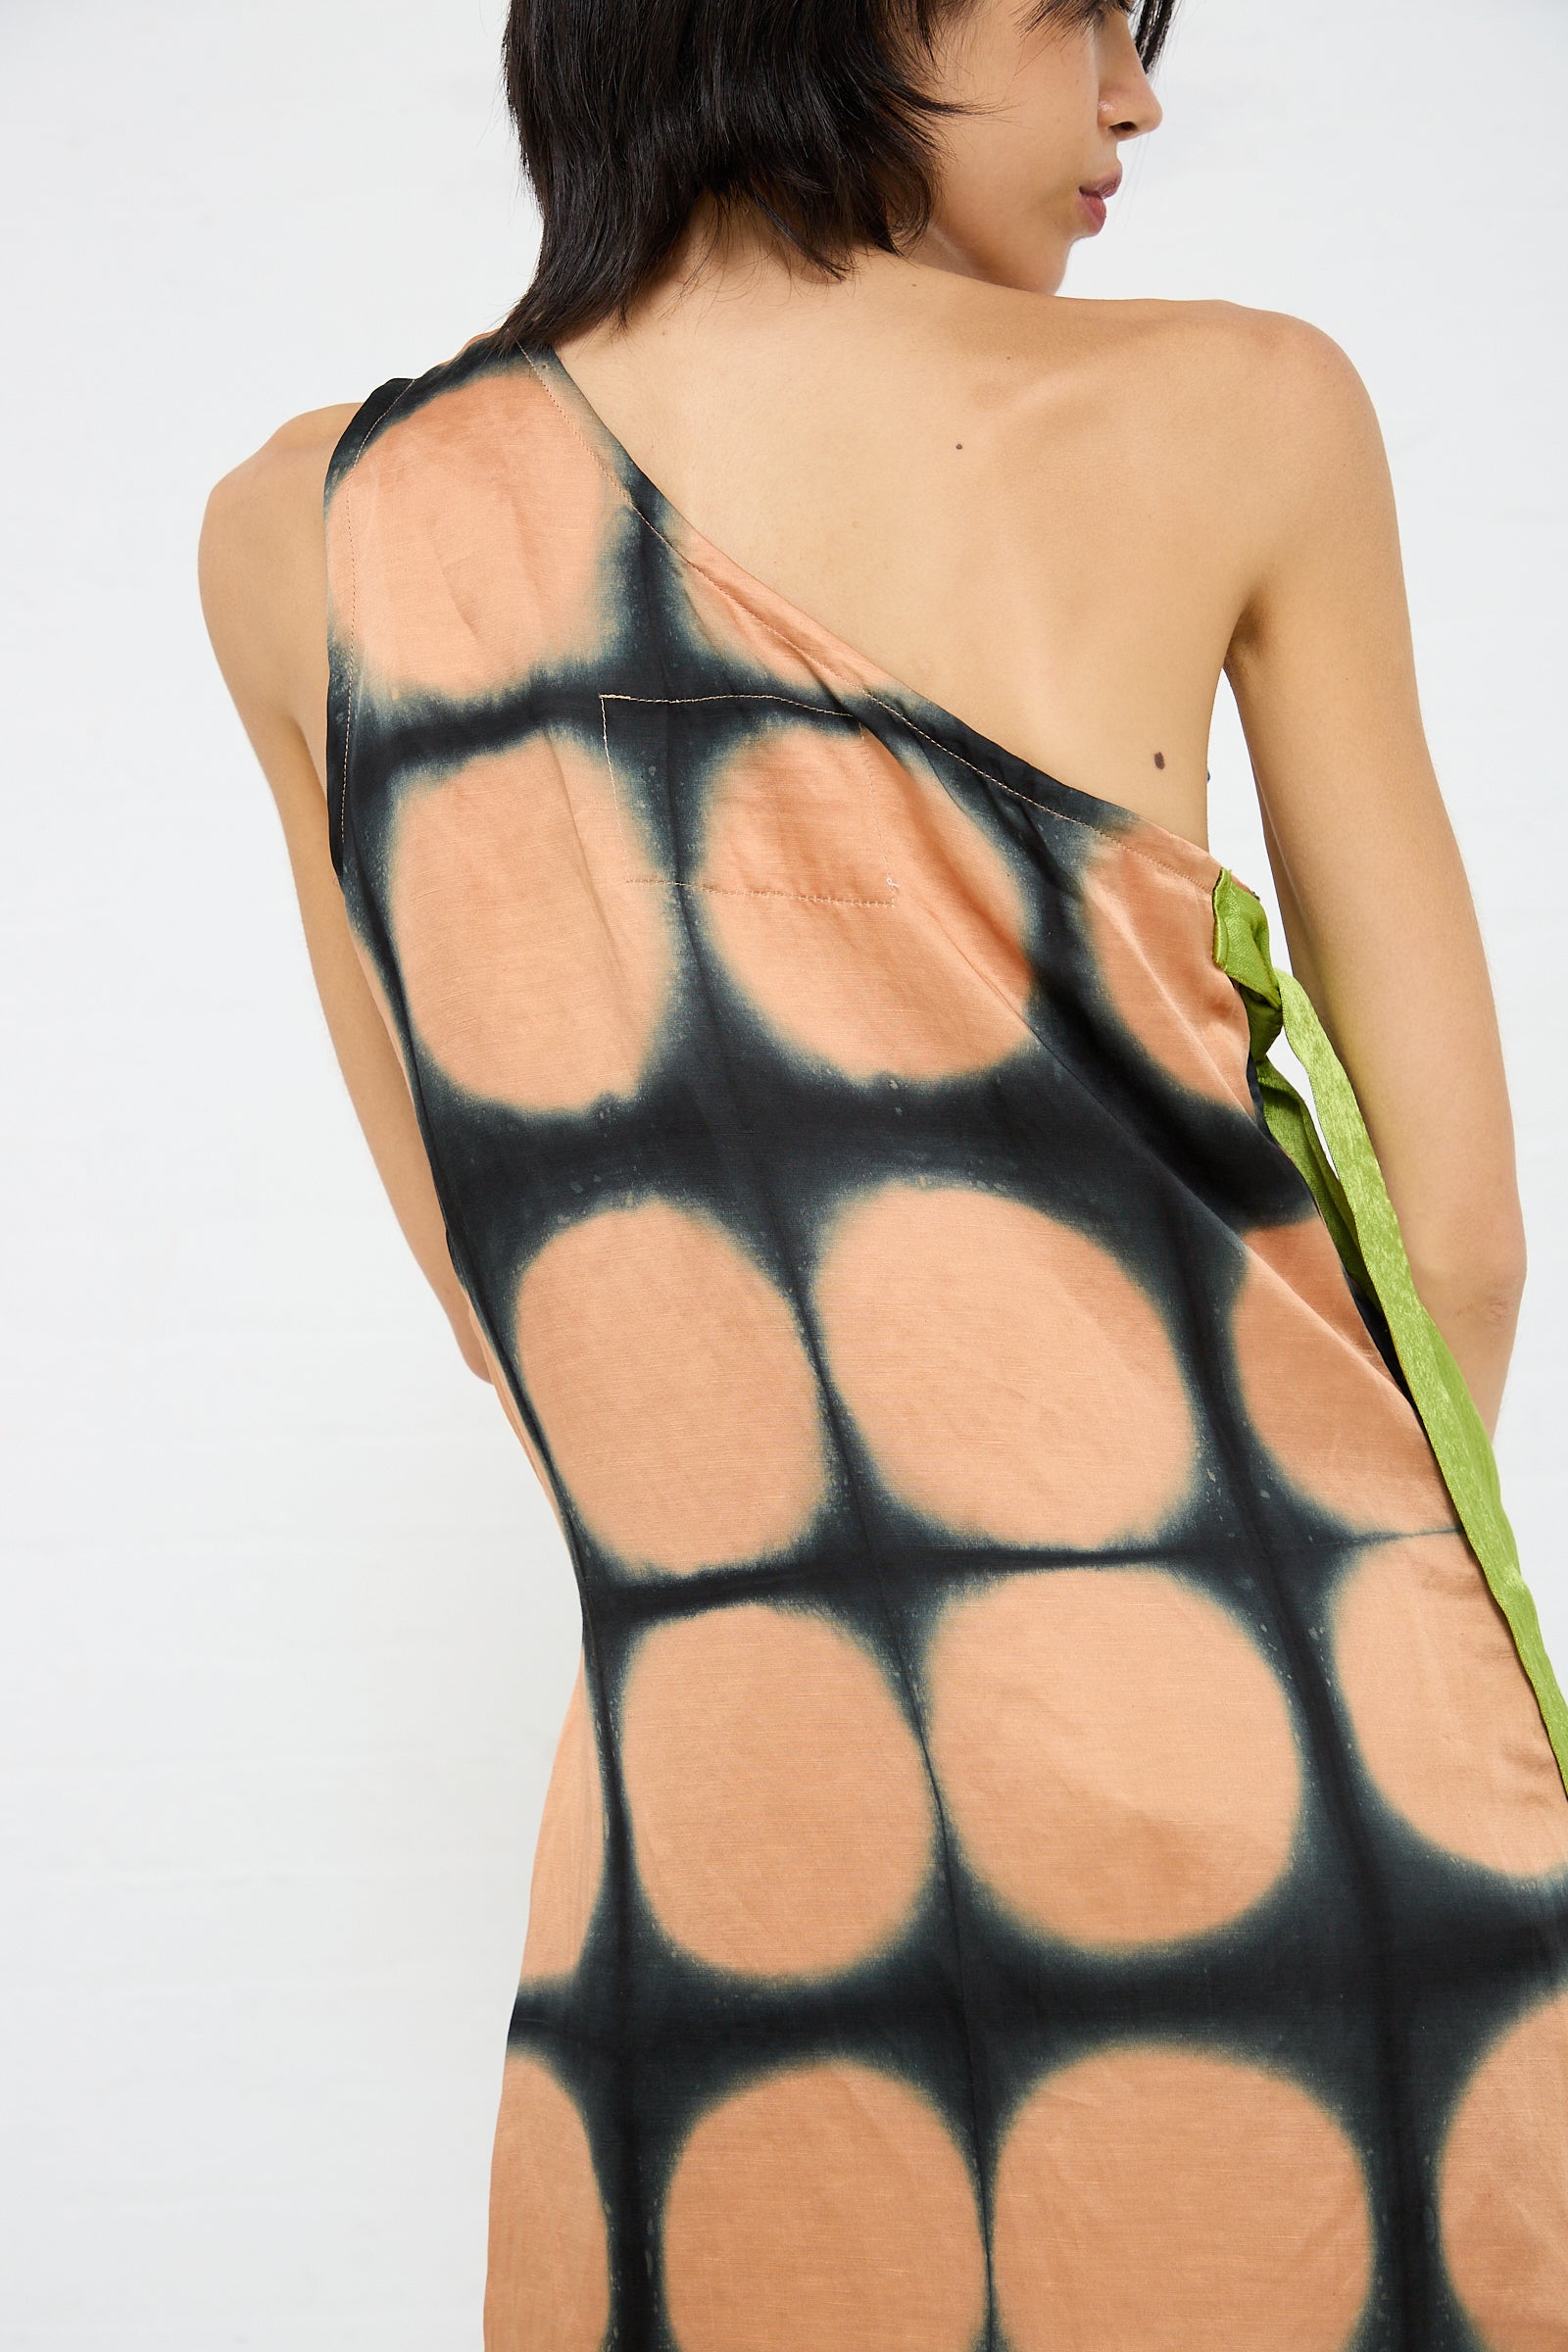 A person wearing the TIGRA TIGRA One Shoulder Mini Dot Dress, a sleeveless, asymmetrical, hand-dyed dress with a circular pattern design in black and peach. The linen/silk blend dress features a green stripe along the side.